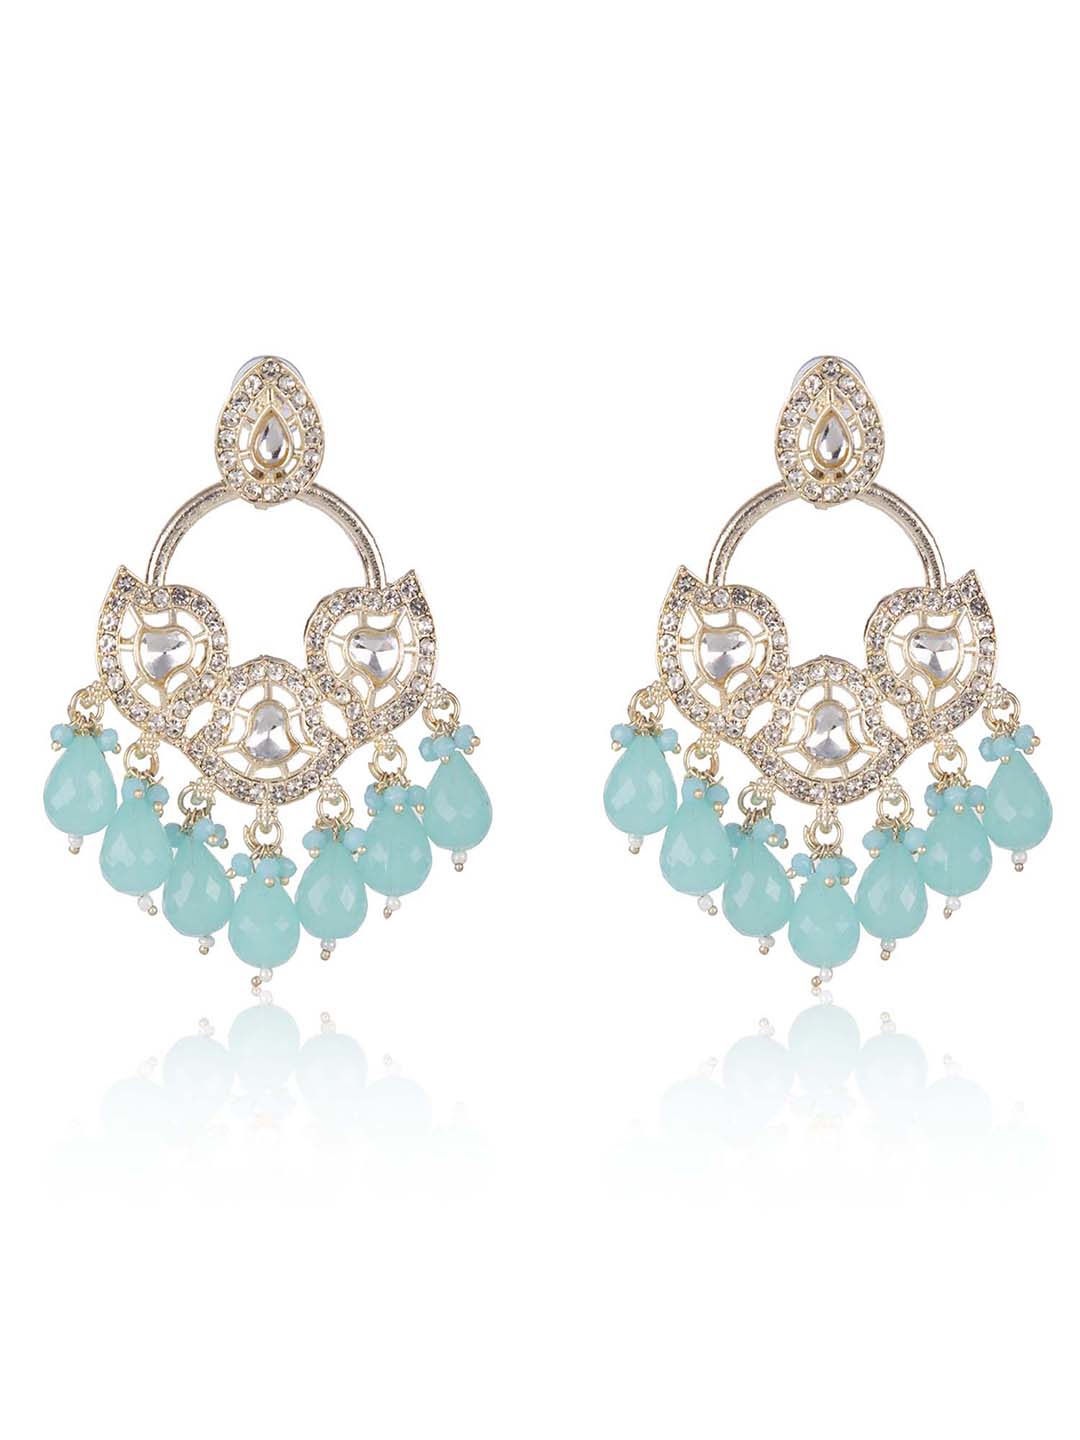 Priyaasi Gold Plated Stone Studded Blue Beaded Drop Earrings